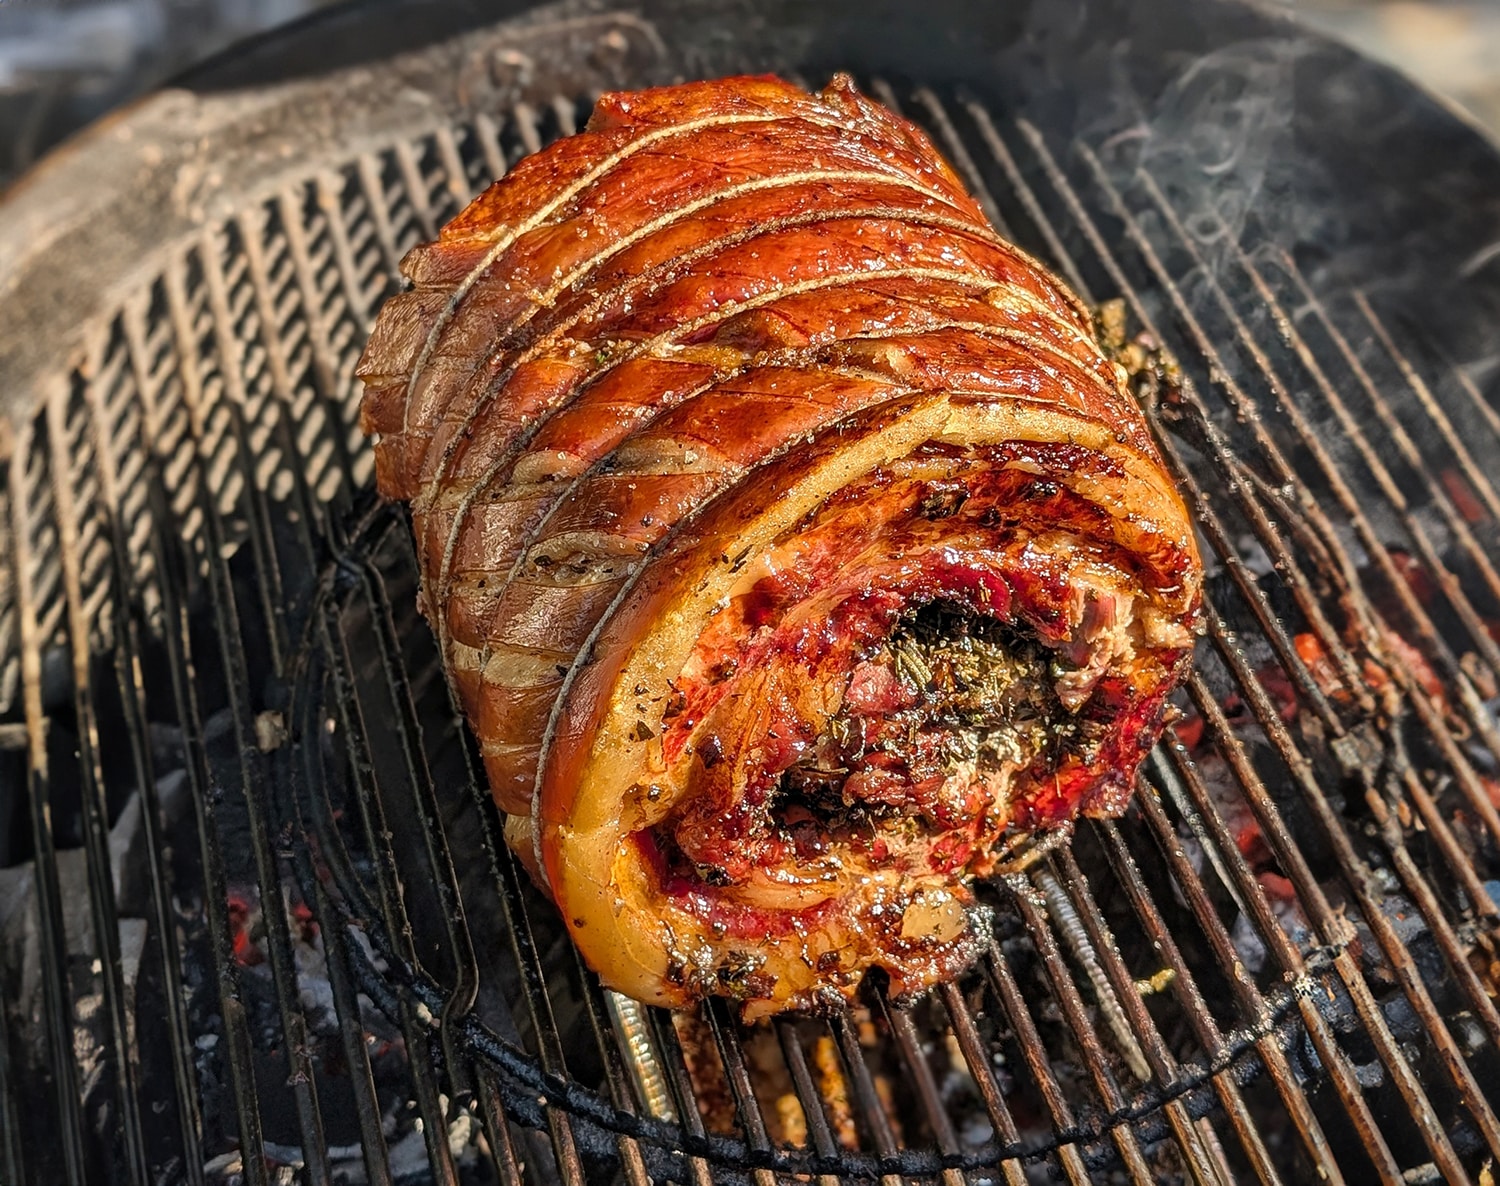 Barbecued pork belly with herb & peppercorn stuffing